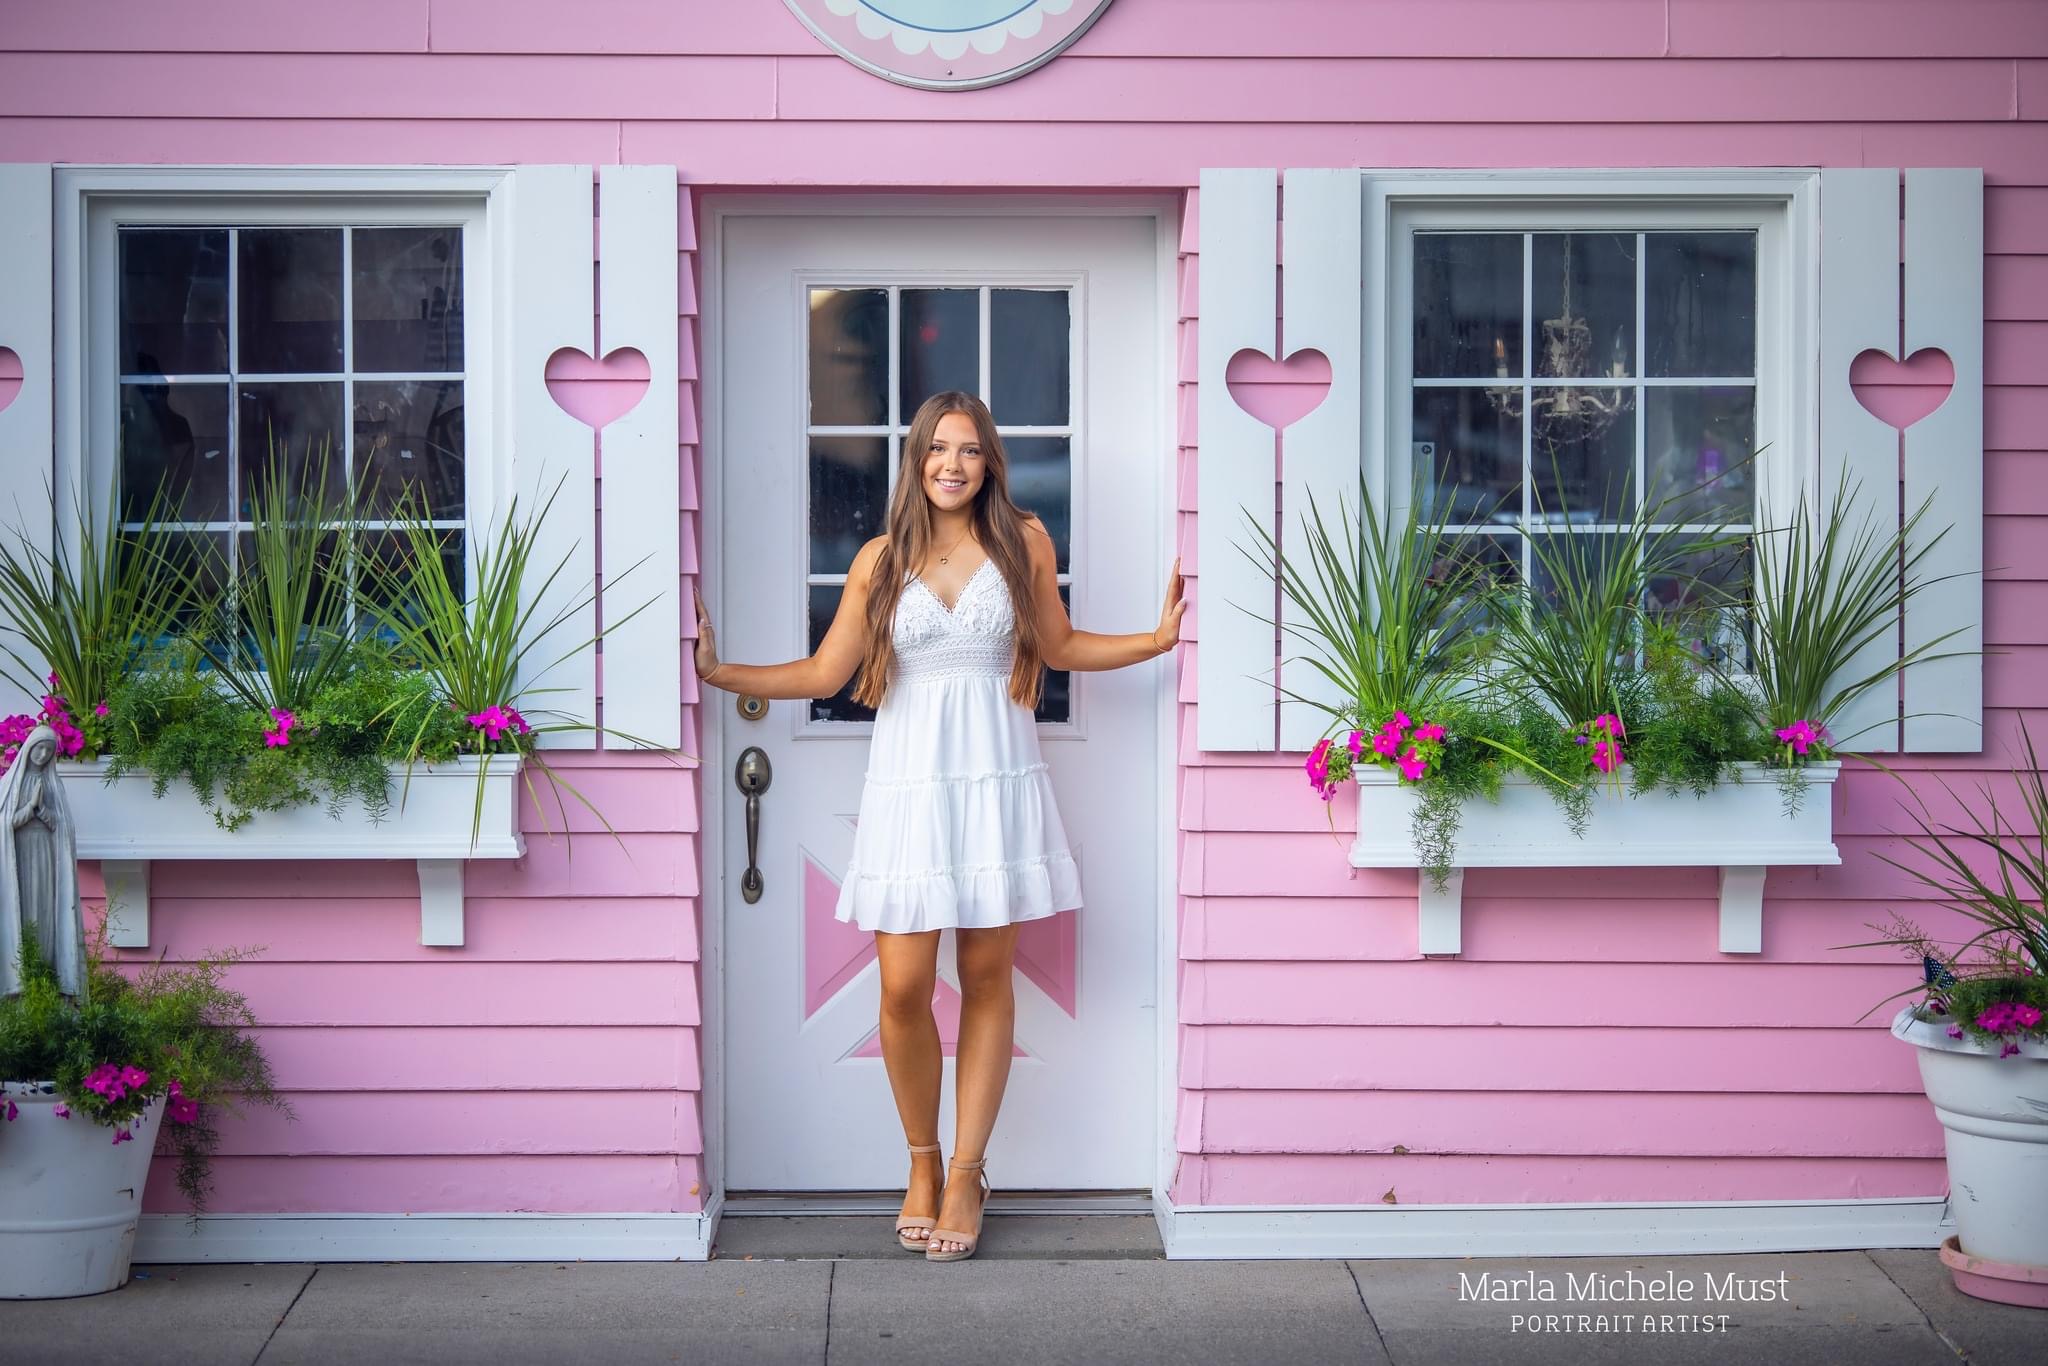 A high school senior poses for her graduation photo while standing in the doorway of a pink house and flower beds within a Detroit neighborhood